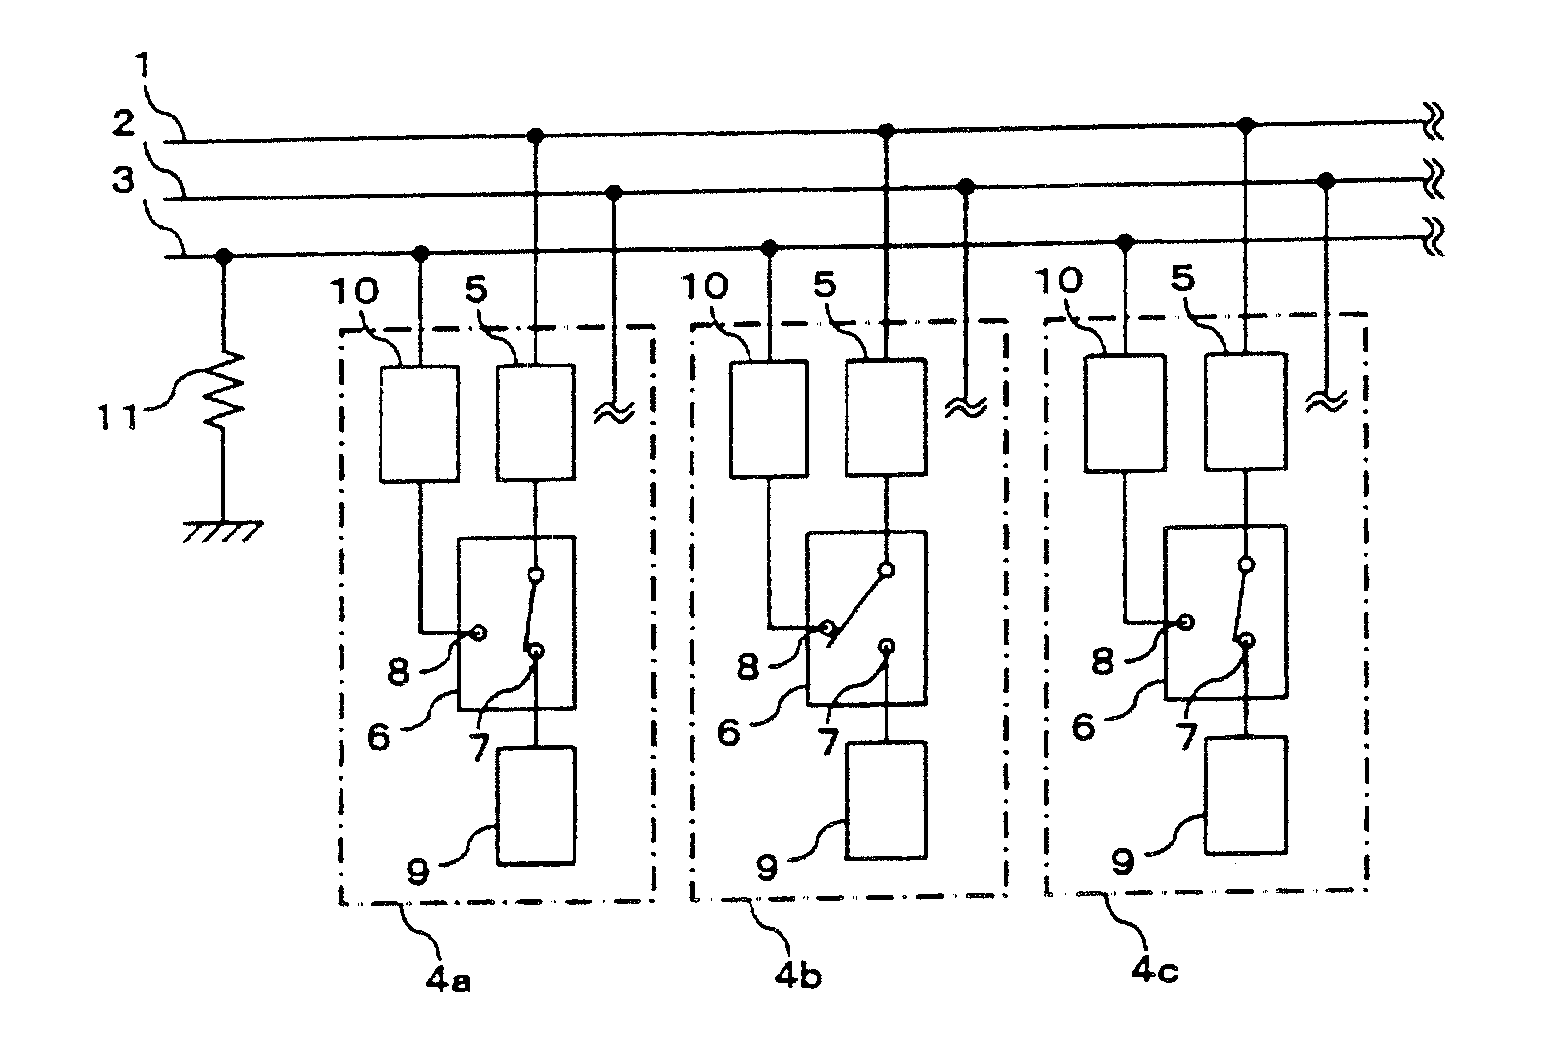 Power feed system for vehicle